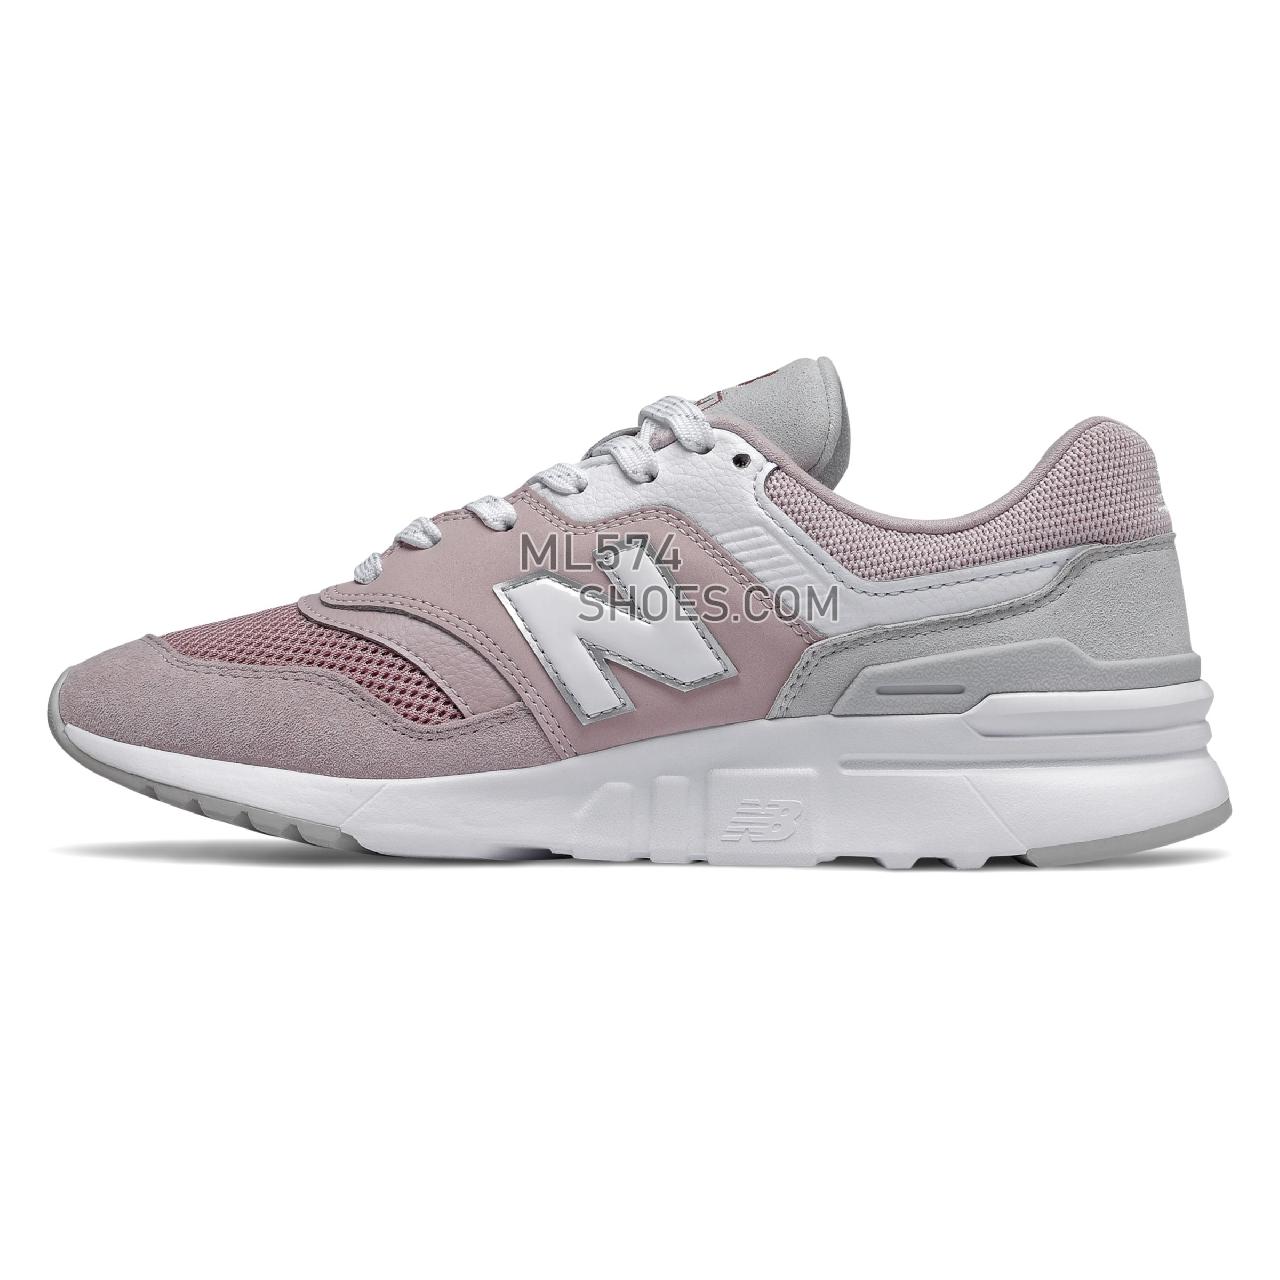 New Balance 997H - Women's Sport Style Sneakers - Space Pink with Summer Fog - CW997HBP